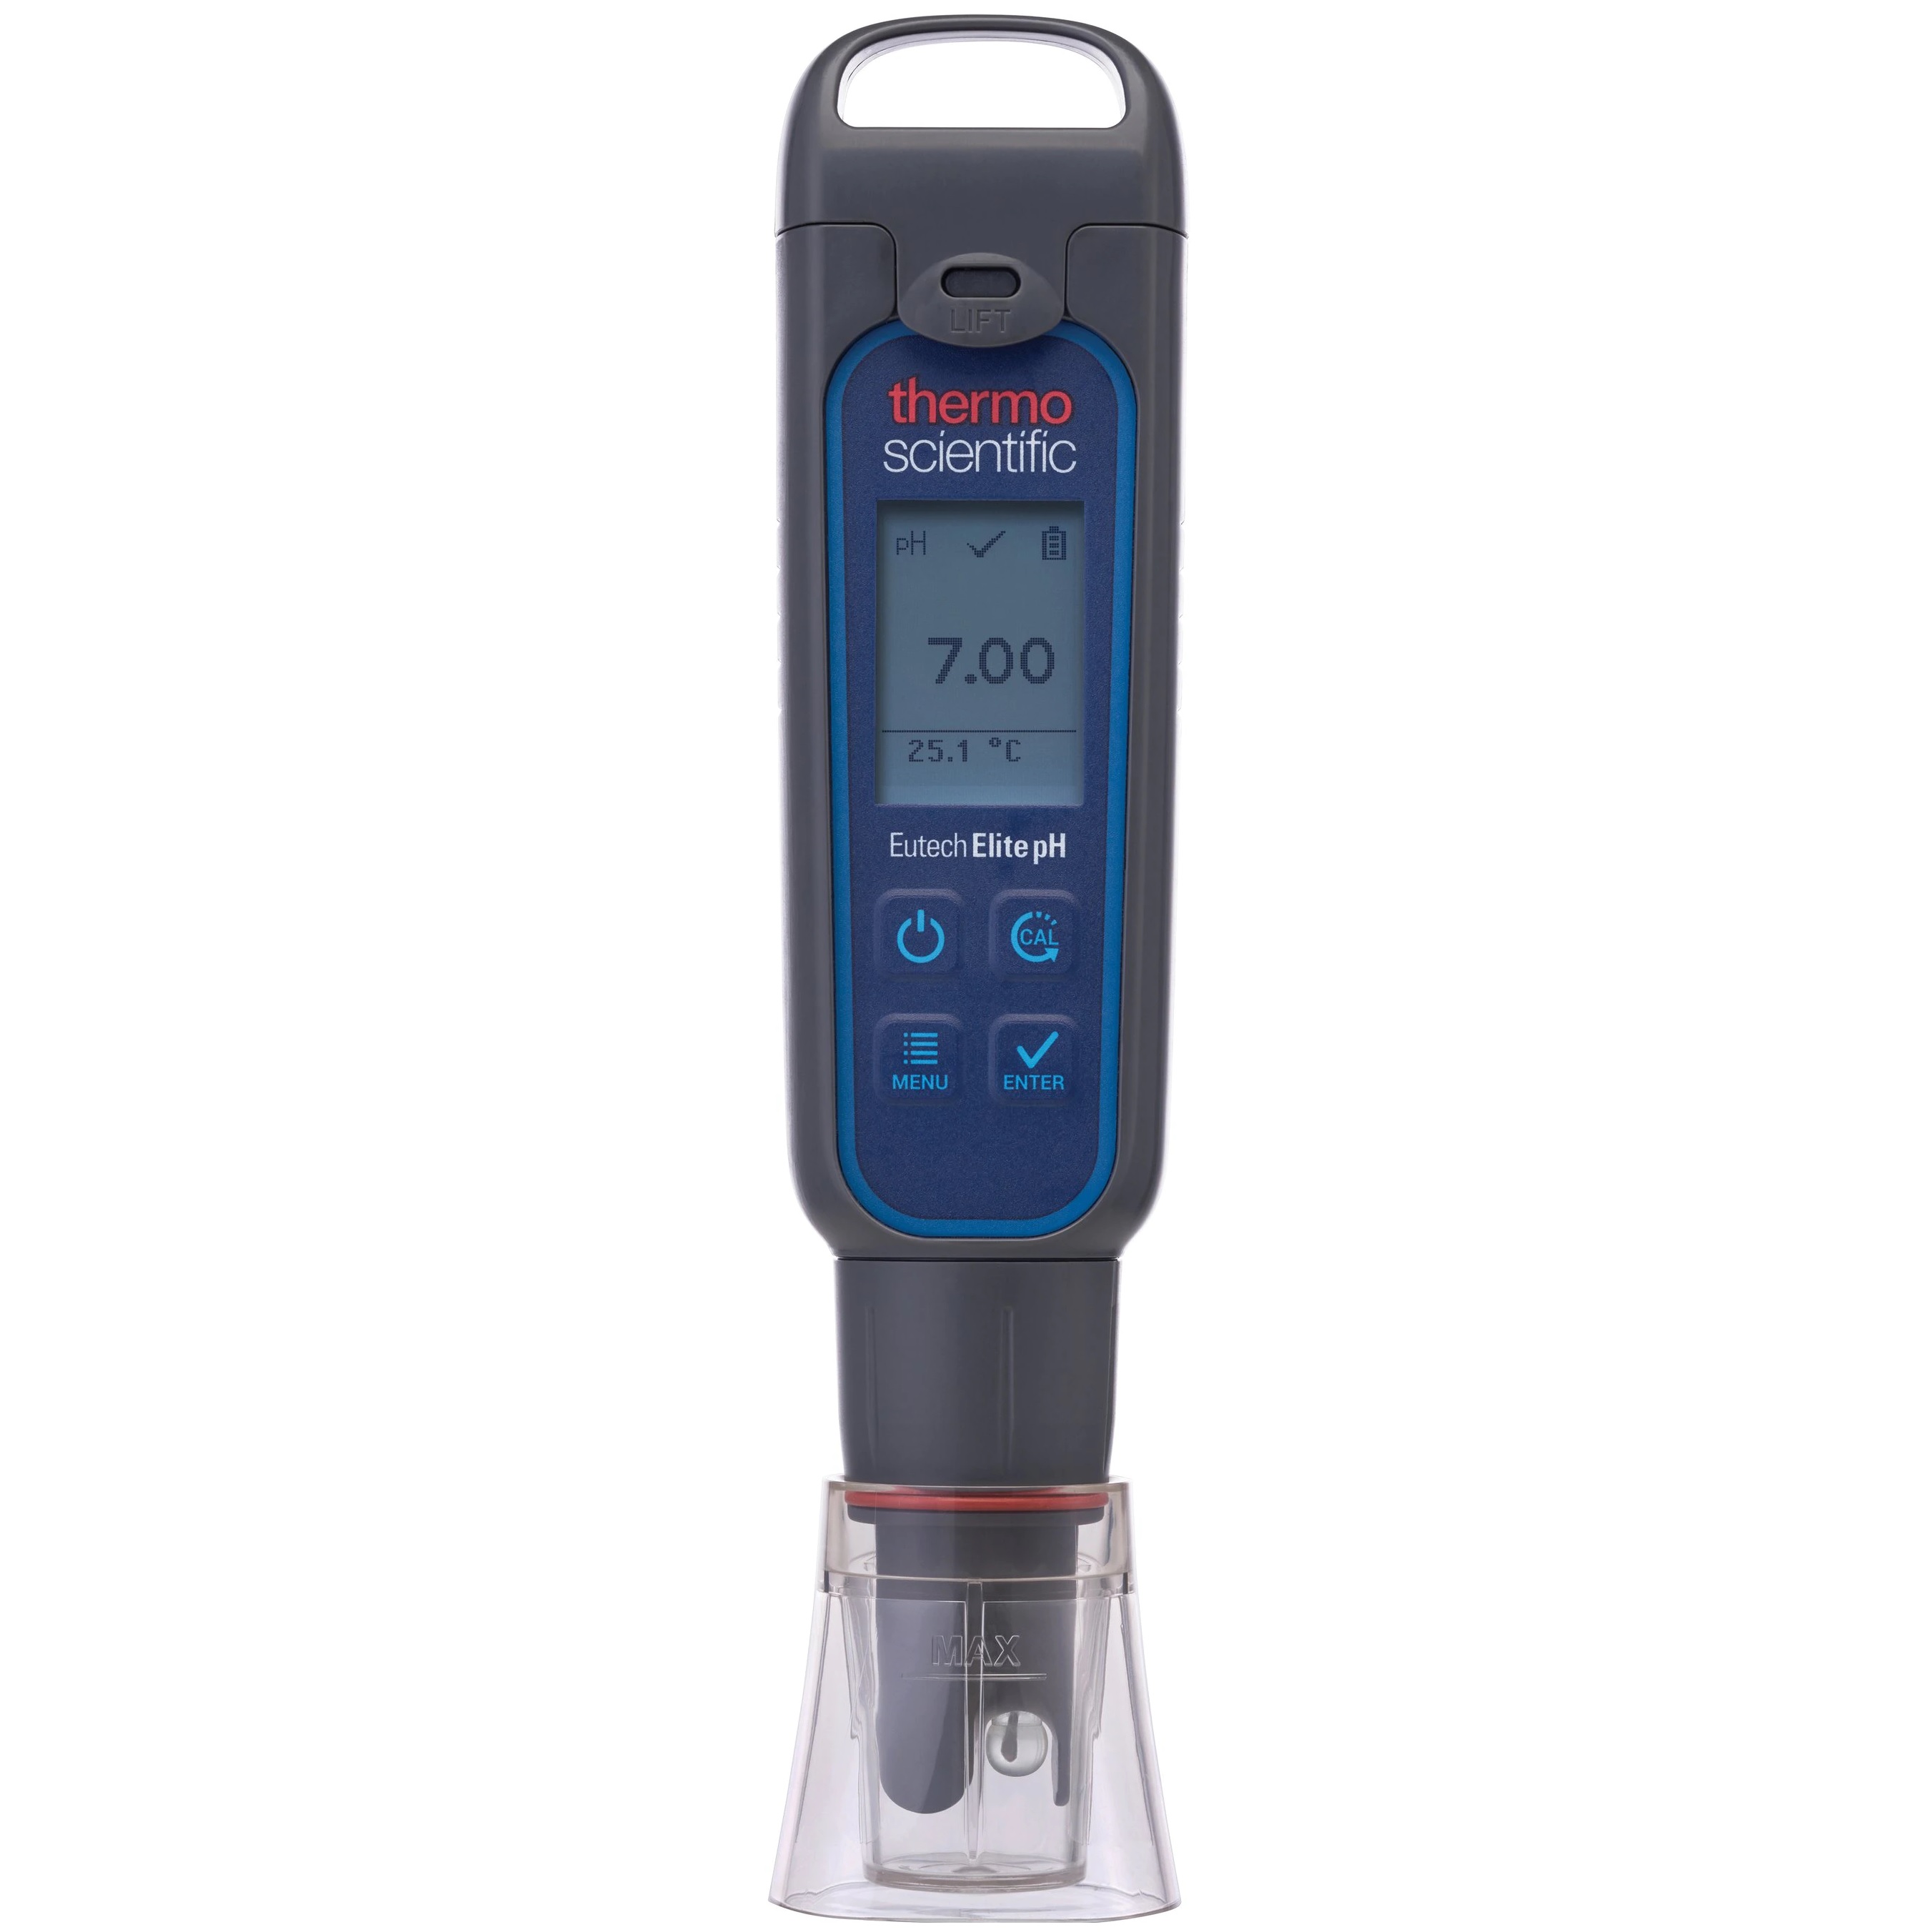 Thermo Scientific™ Replacement sensor for Elite pH pocket tester